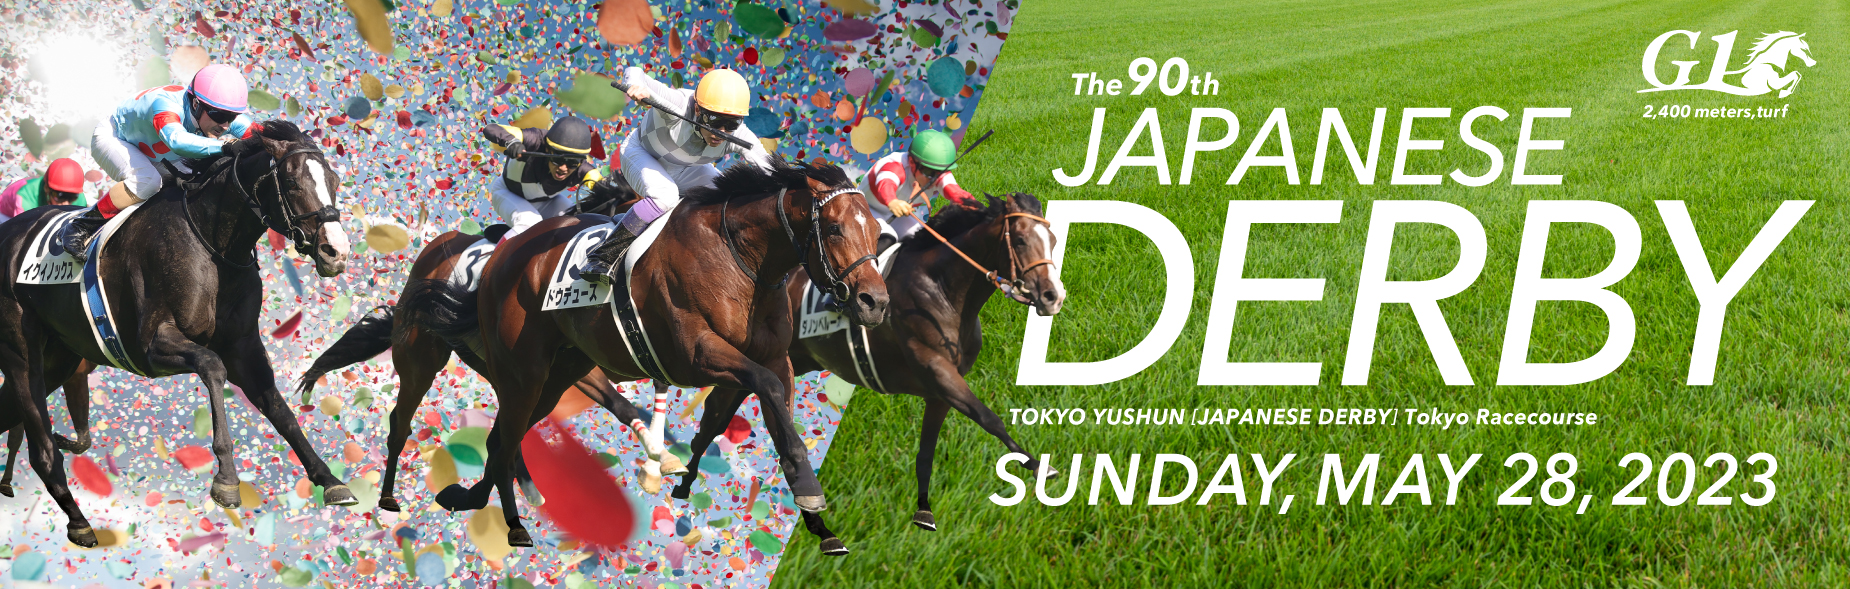 the90th japanese derby tokyo yushun japanese derby tokyo racecourse sunday may 28,2023